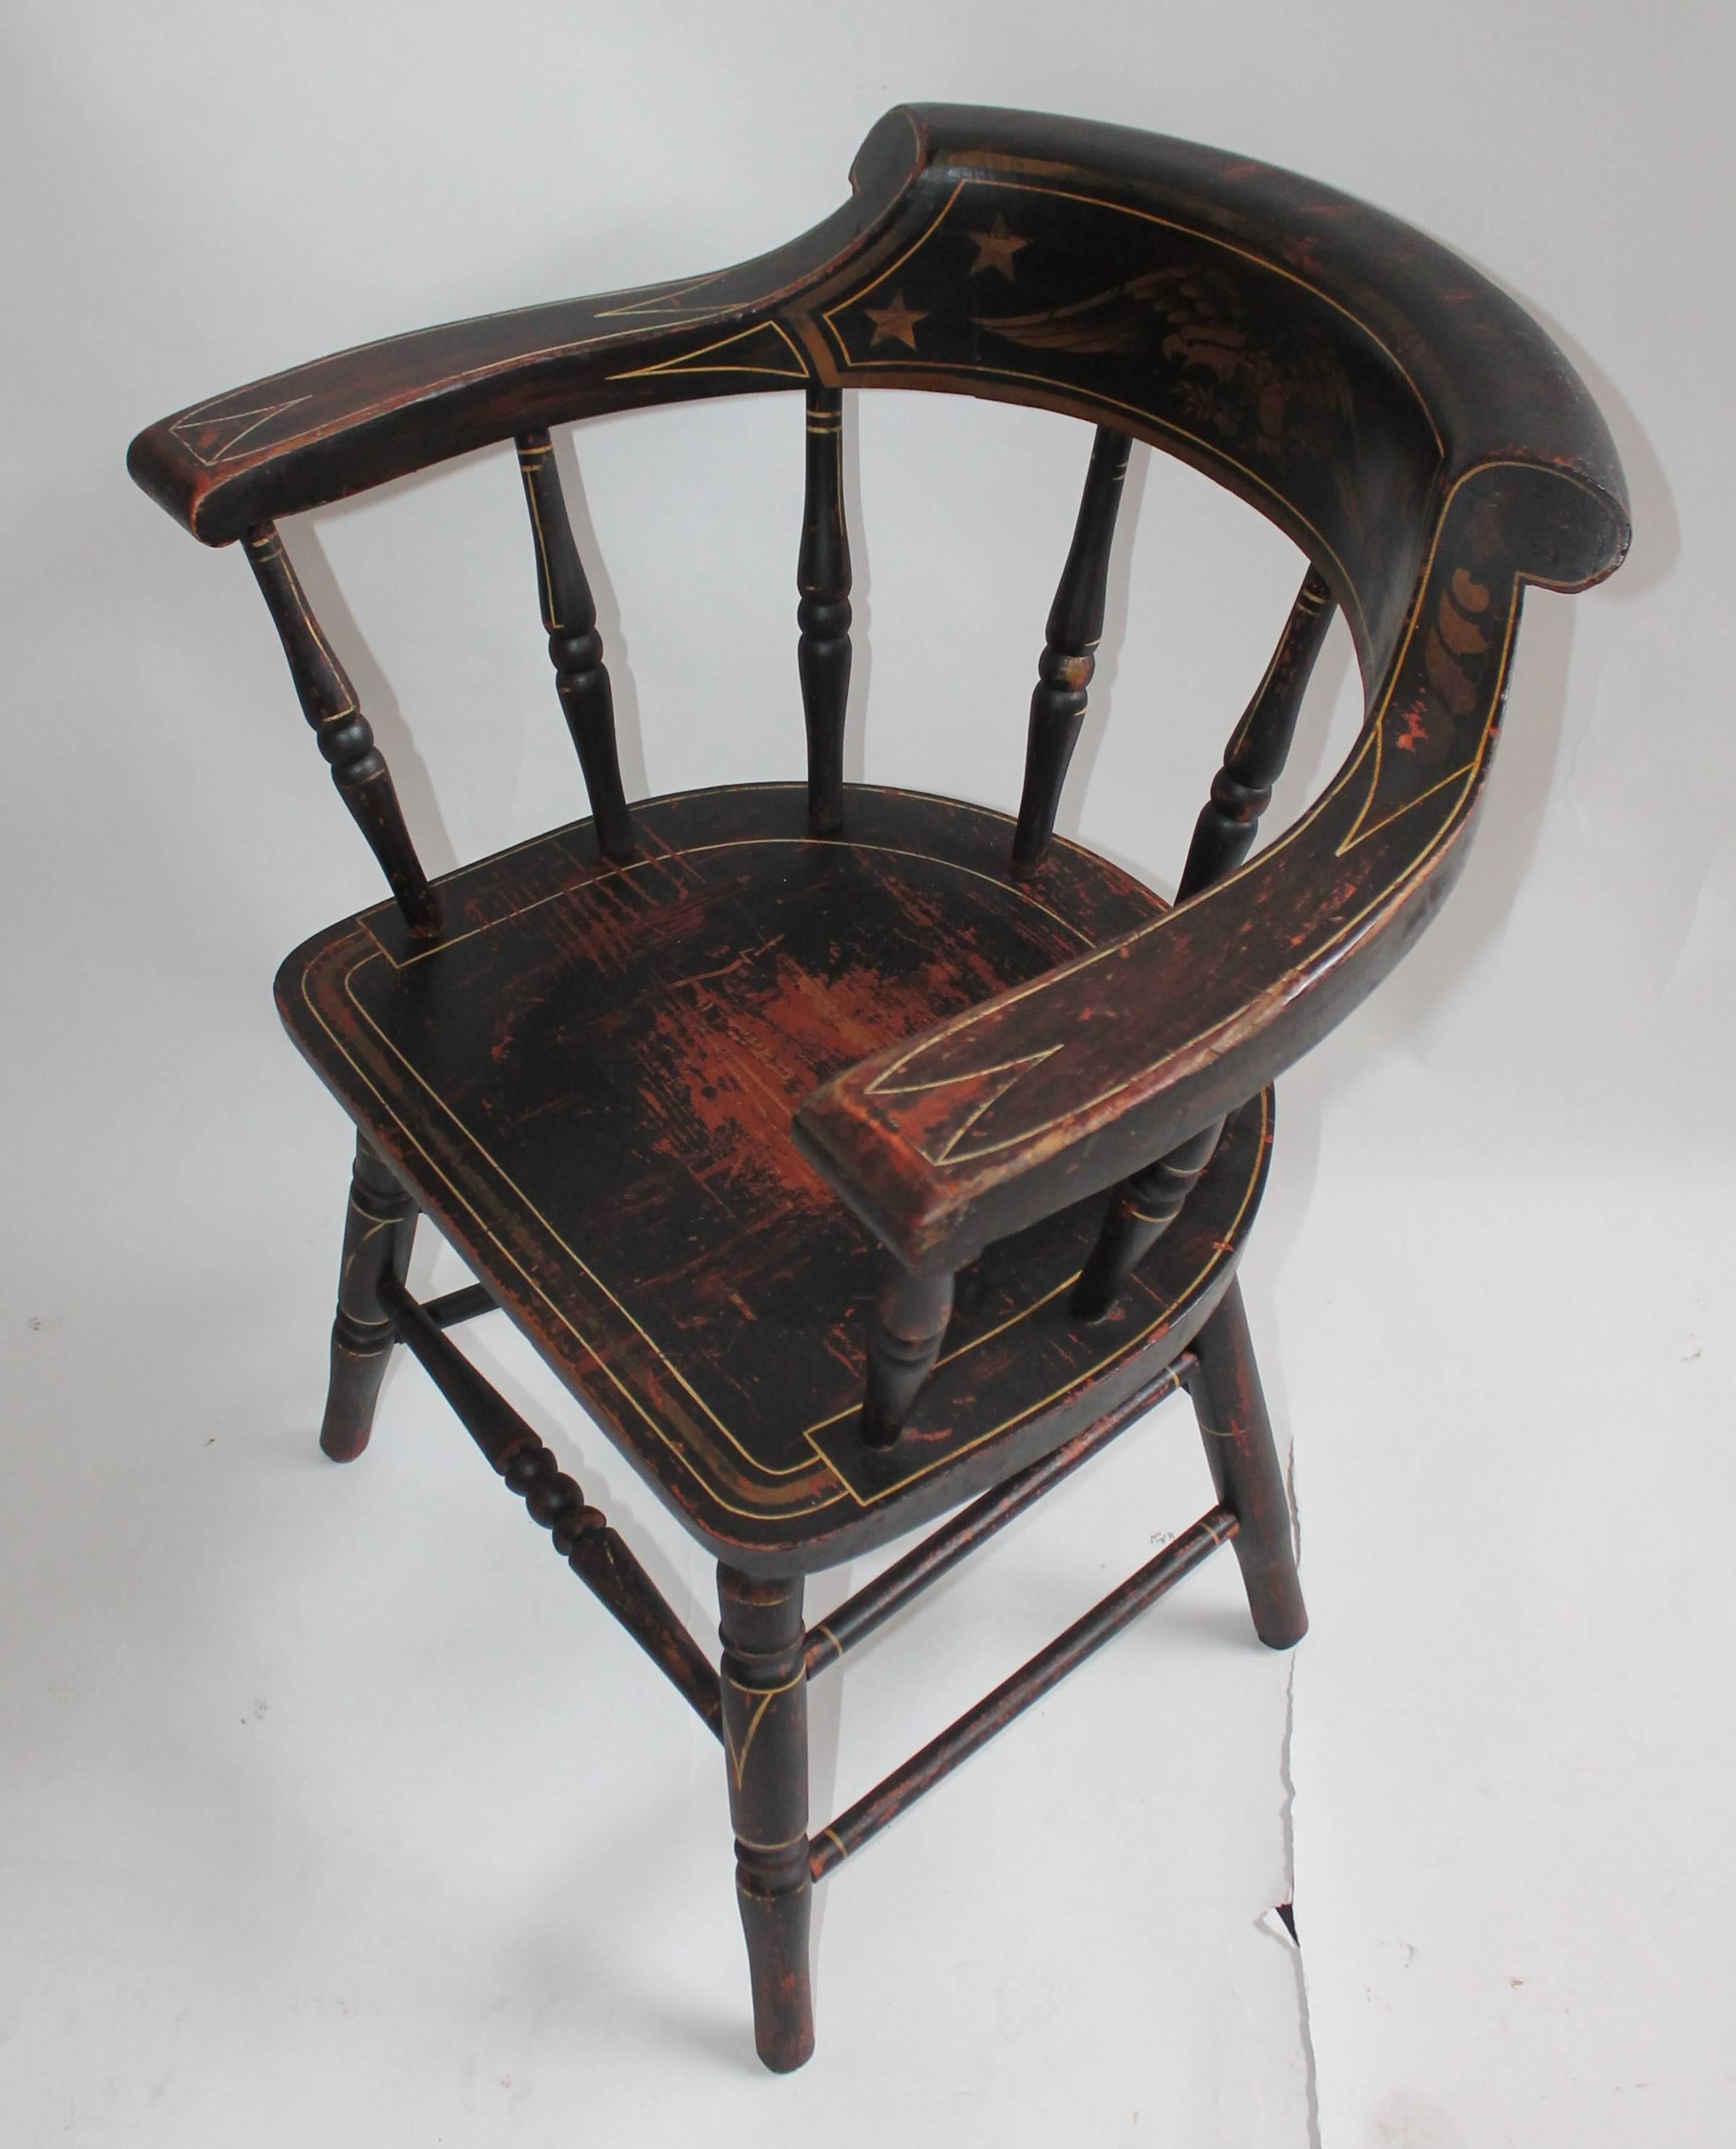 This amazing all original painted and decorated sea captains chair from New England. This chair has the original gilded surface and a red painted base. This plank seat chair is in great sturdy condition.

Seat height is 18" high.